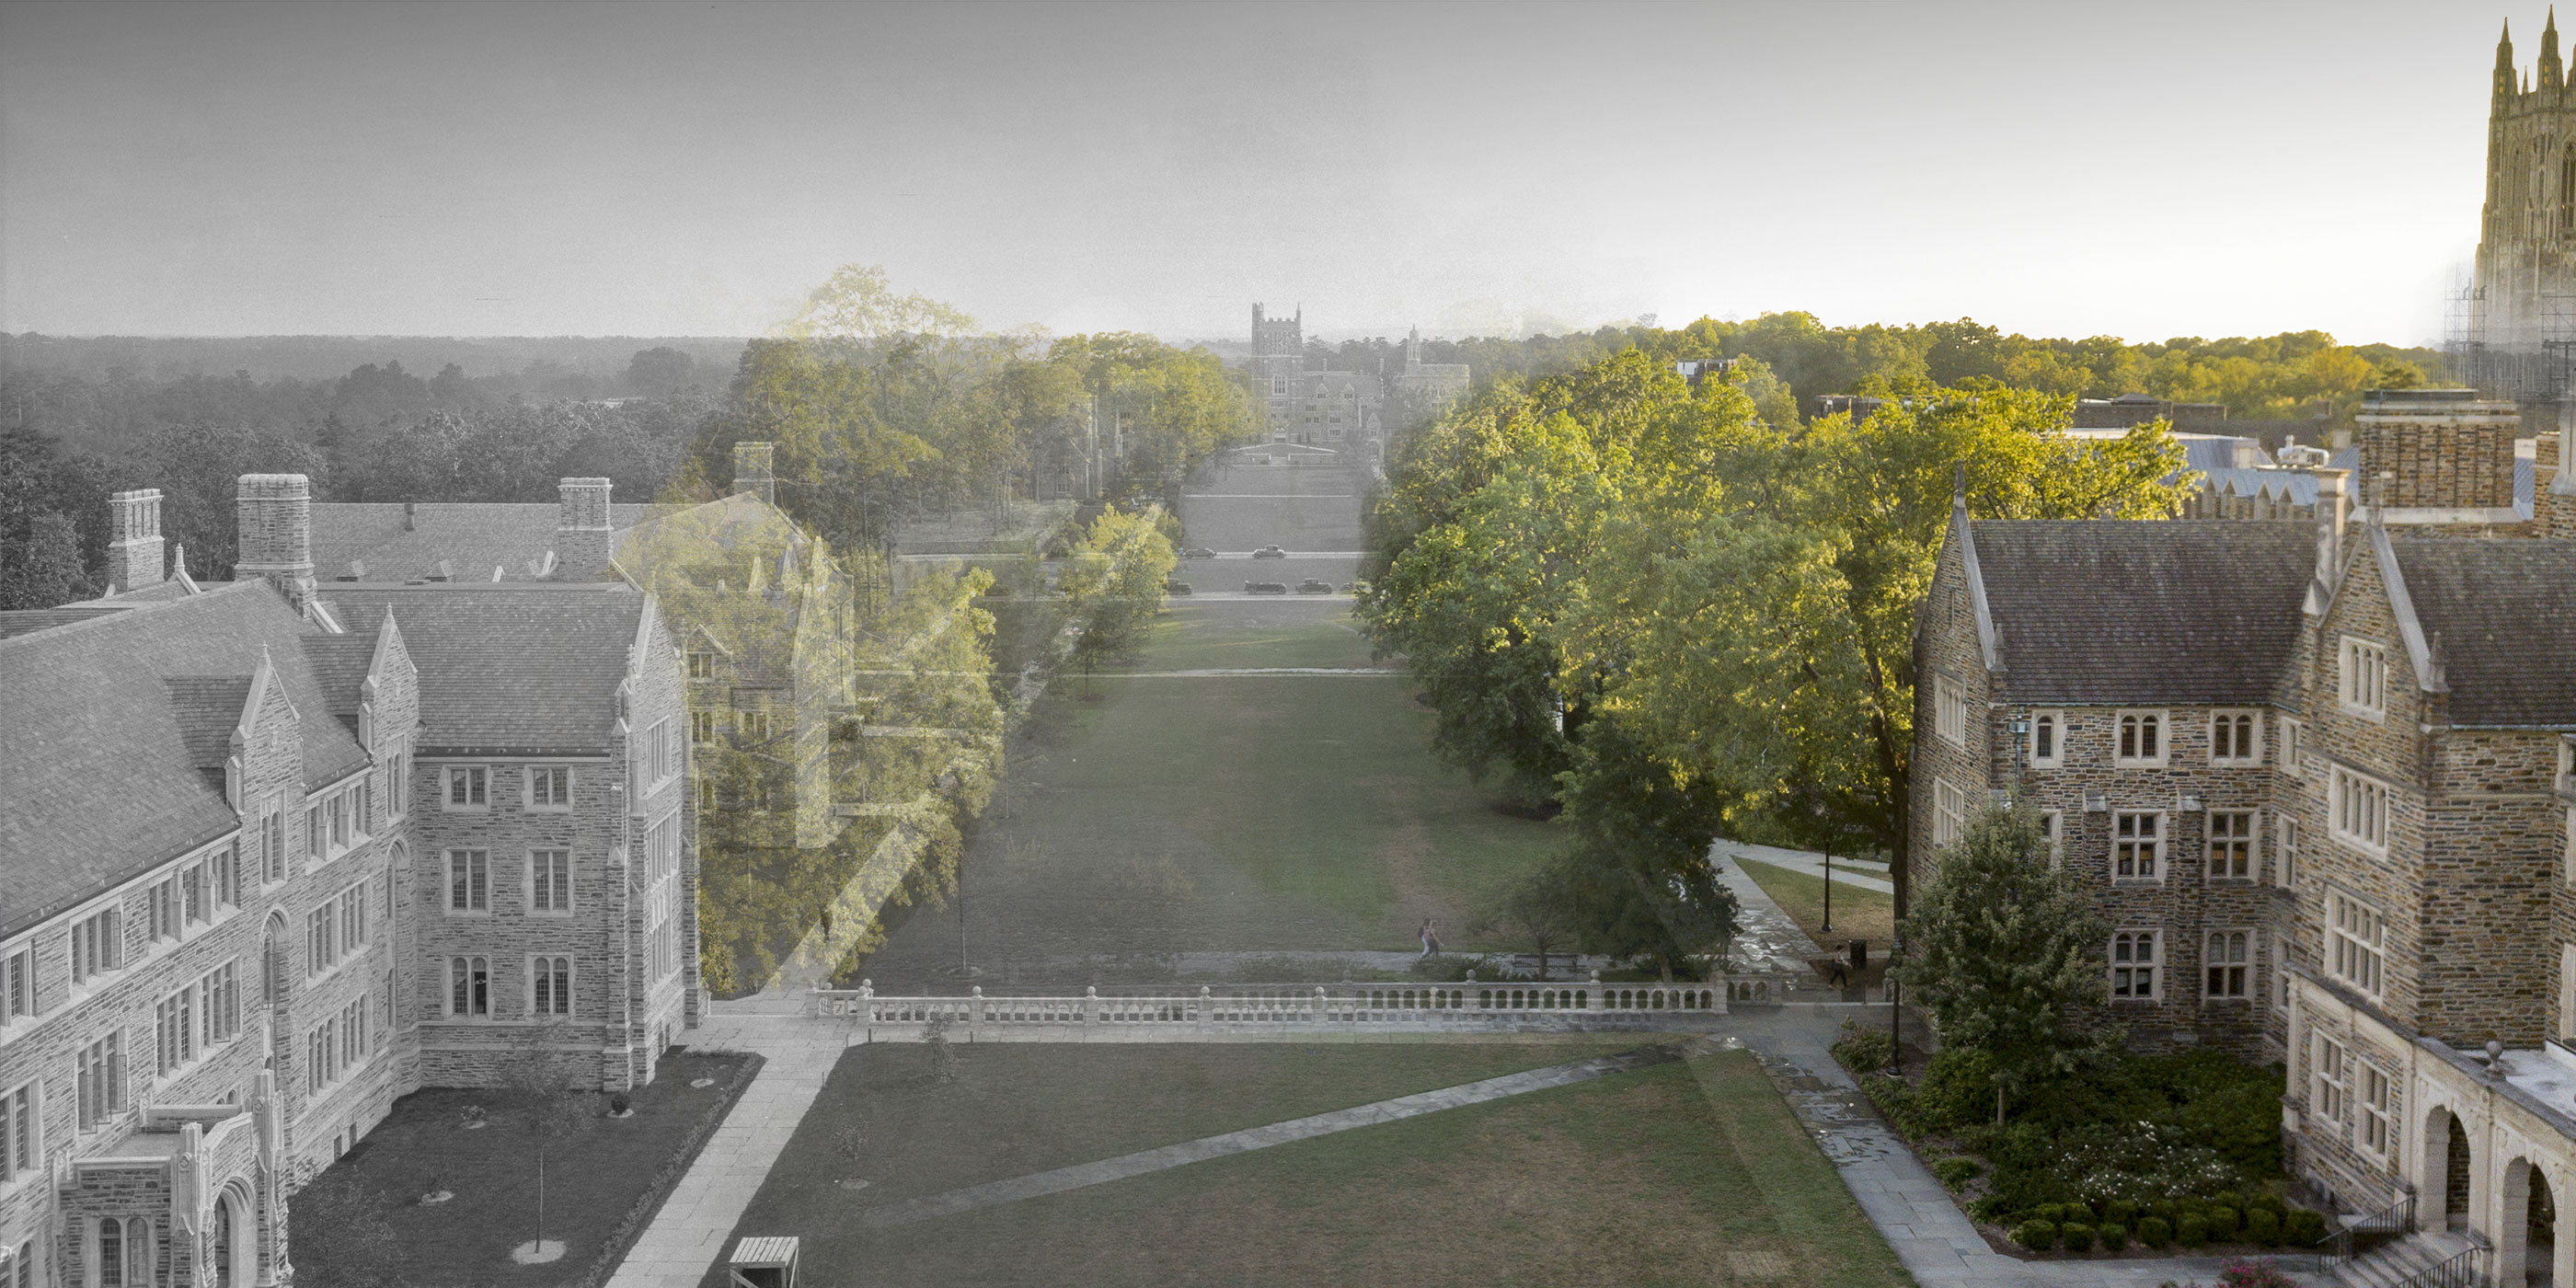 Davidson Quad transitioning left-to-right from an early photo of Duke's West Campus to a modern photo